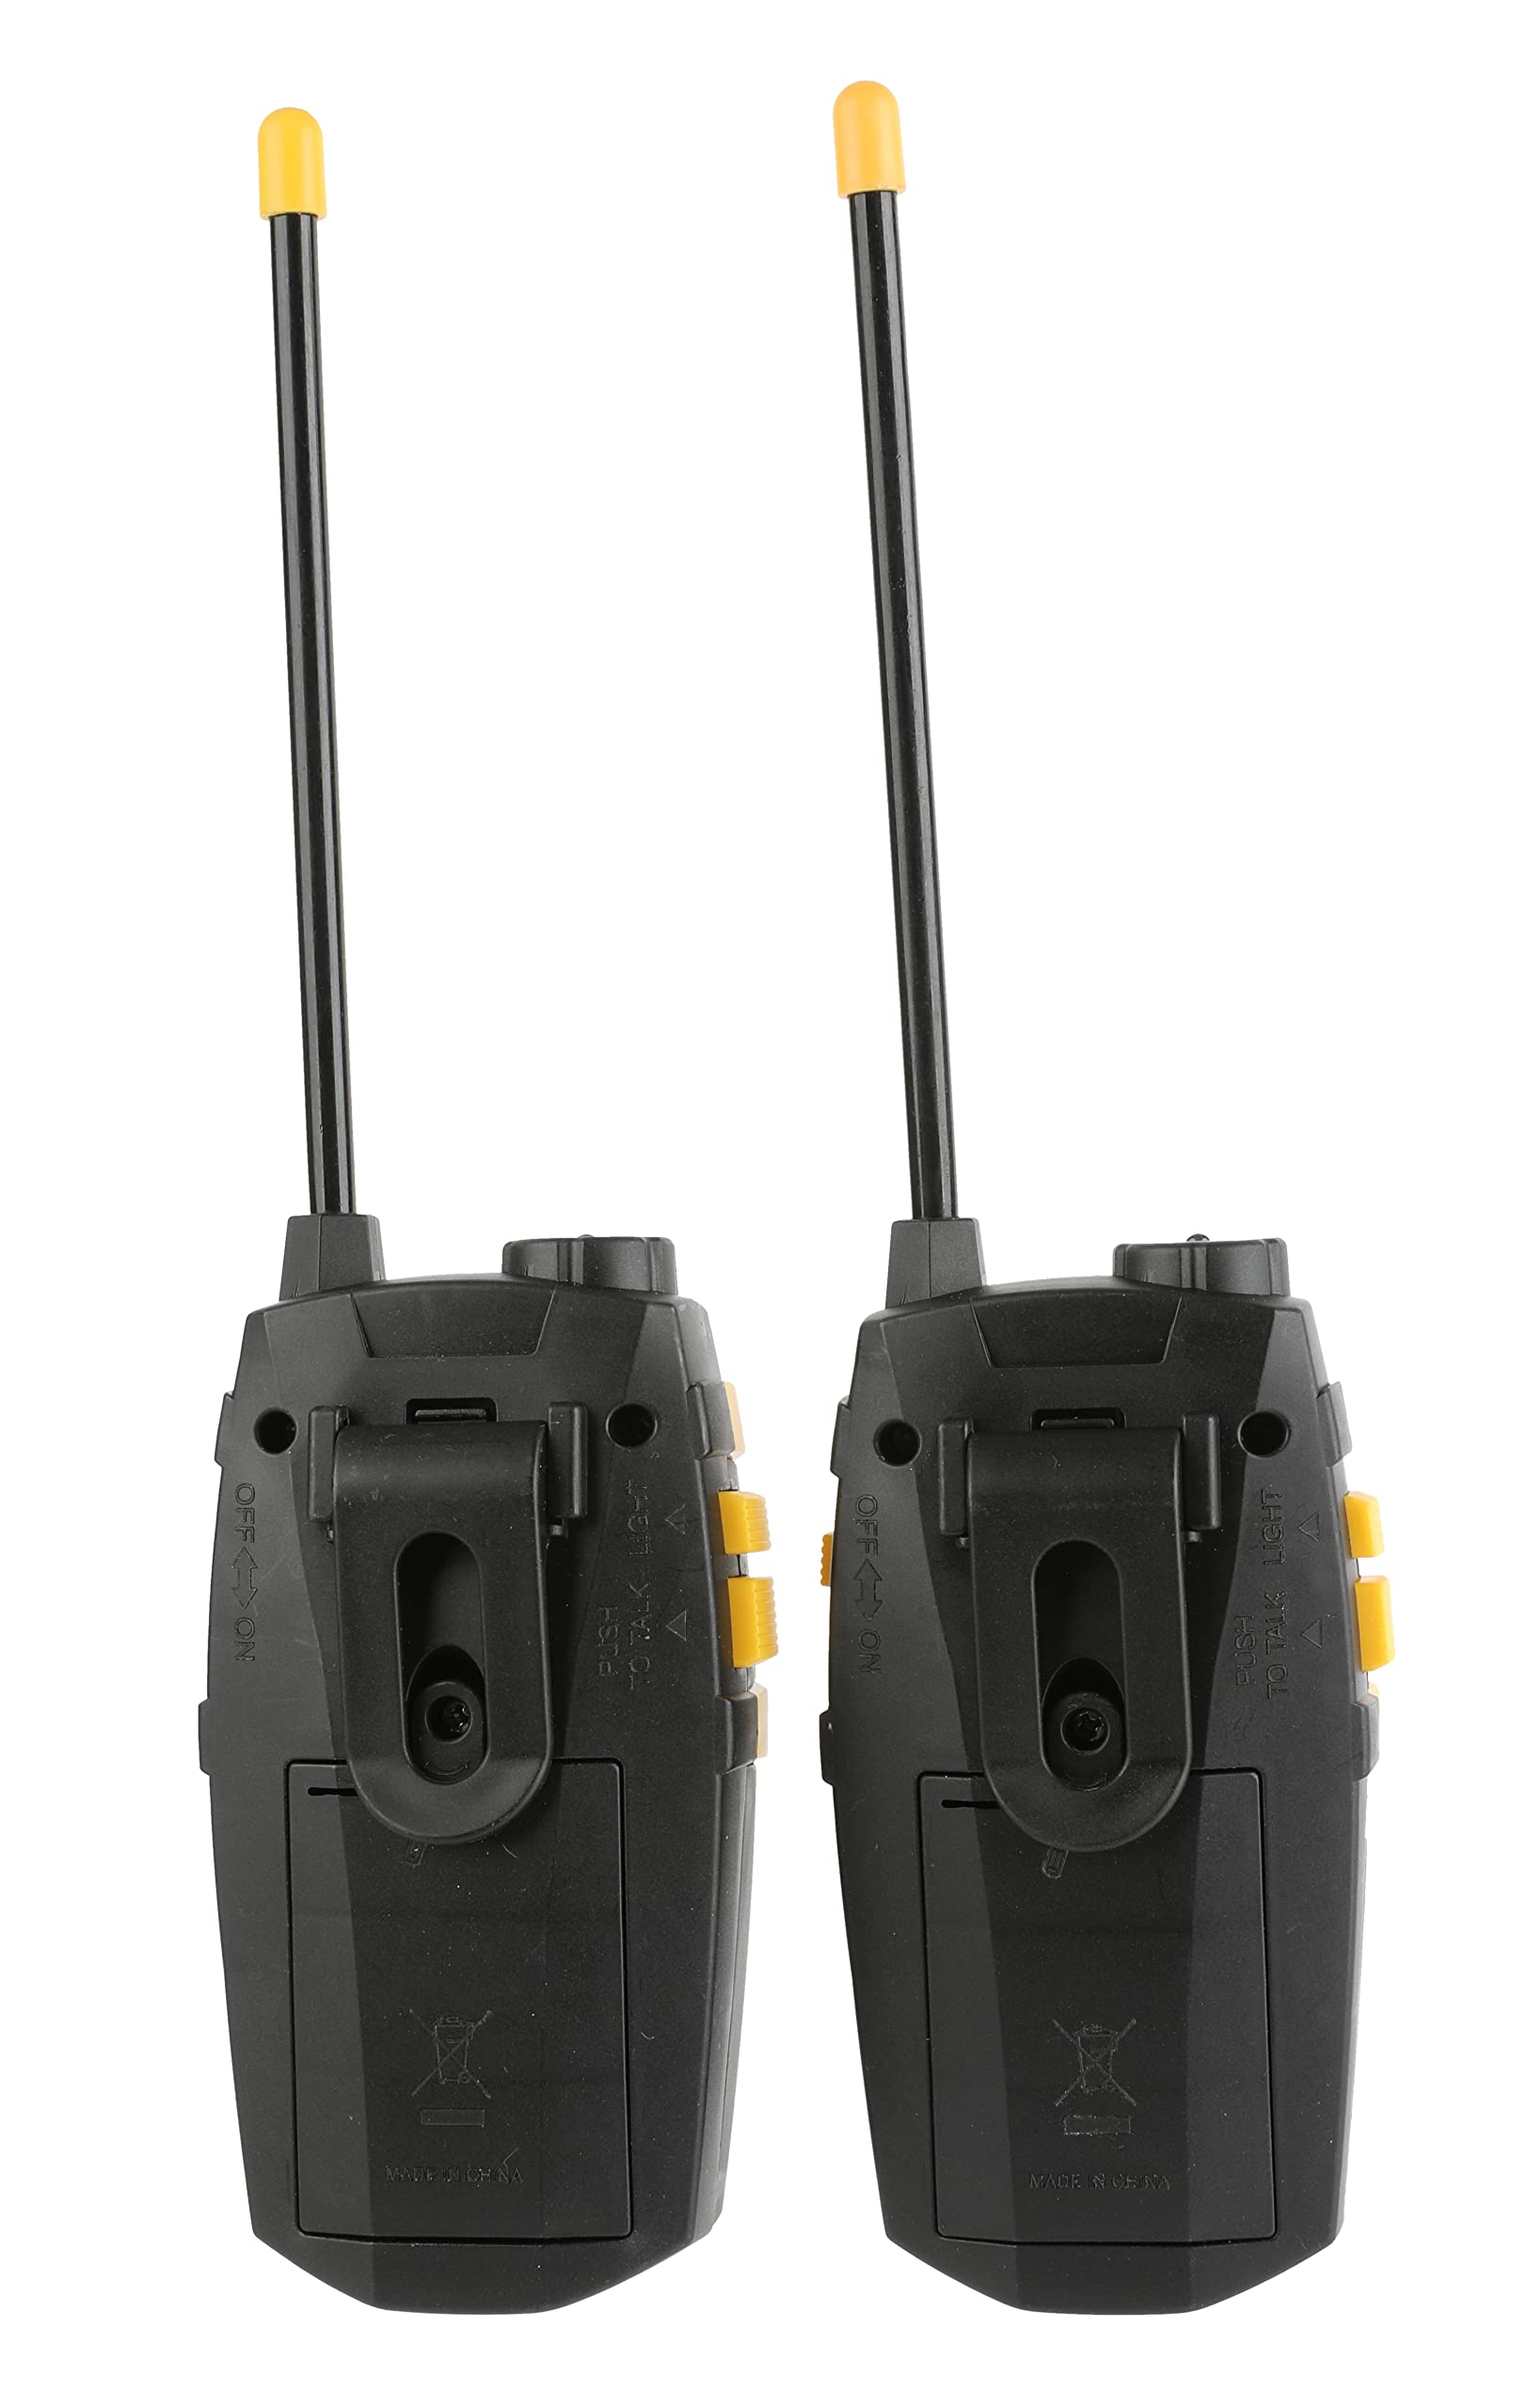 Batman Night Action Molded Walkie Talkies for Kids WT2-01082 | Safe and Flexible Antenna, 1000ft Range, Easy-to-Use Power Switch, Belt Clip, Pack of 2, Stylish Appearance, 2-Pack